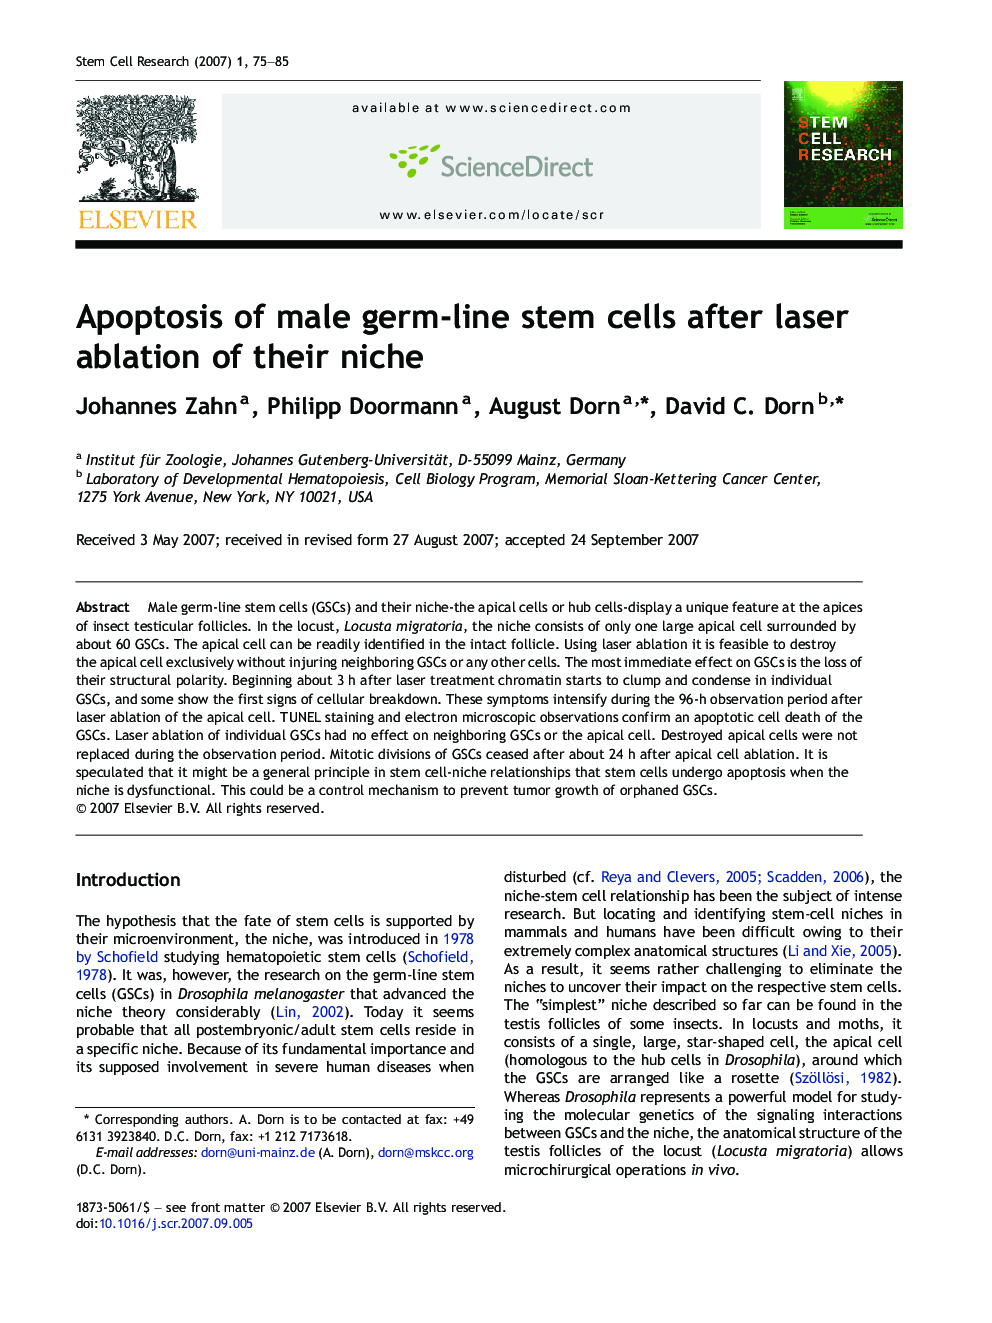 Apoptosis of male germ-line stem cells after laser ablation of their niche